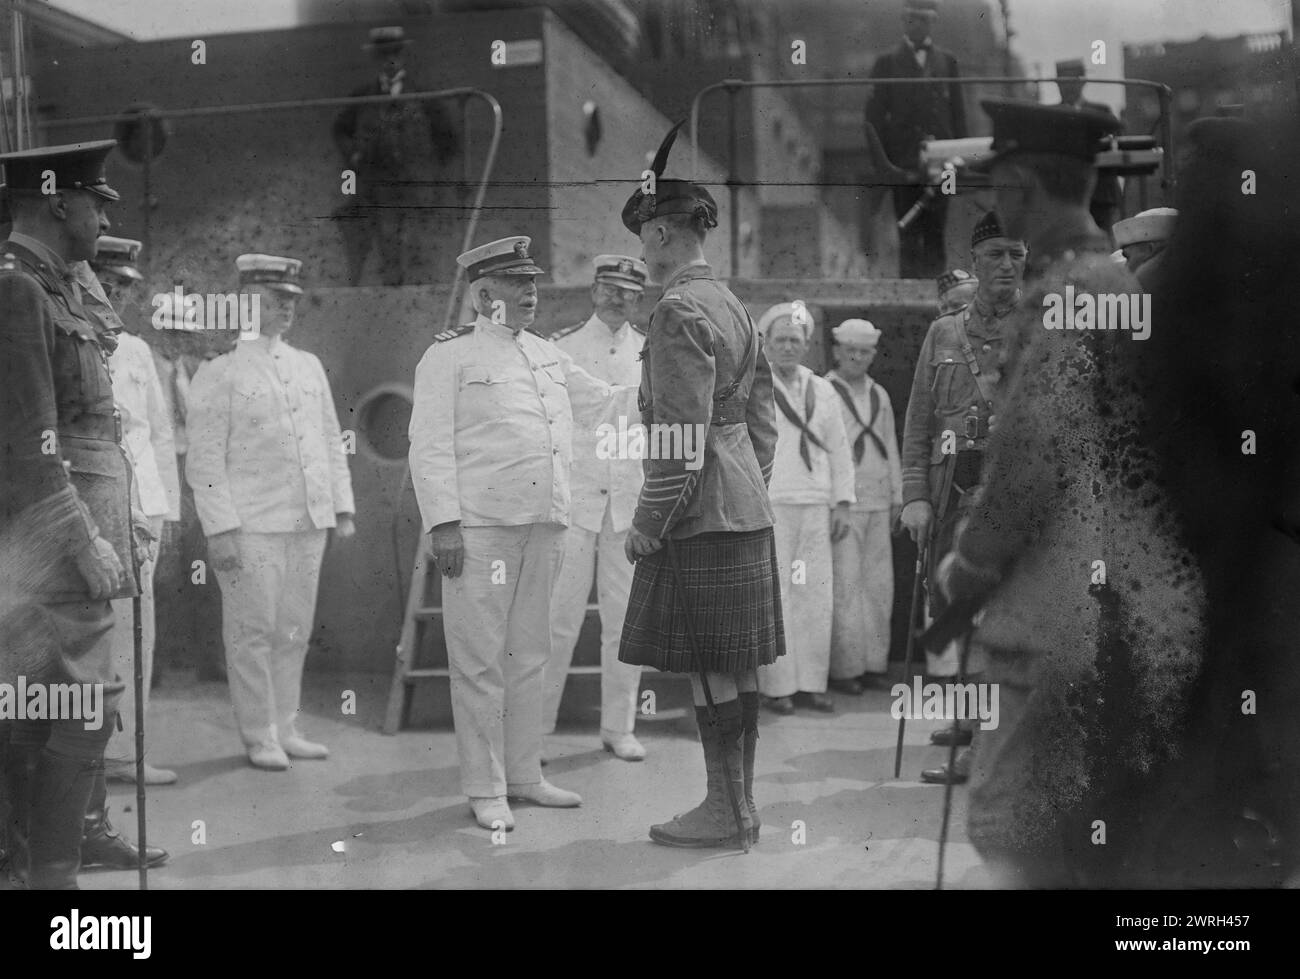 Captain Adams receiving &quot;Kilties&quot; on U.S.S. Recruit, July 1917. Captain Charles Albert Adams (1846-1929) a U.S. naval officer who served as the commander of the USS Recruit, a wooden mockup of a battleship built in Union Square, New York City by the Navy to recruit seamen and sell Liberty Bonds during World War I. Adams is greeting members of the Canadian Highlander regiments, (&quot;Kilties&quot;) who were in New York in July 1917 to assist in recruitment. Stock Photo